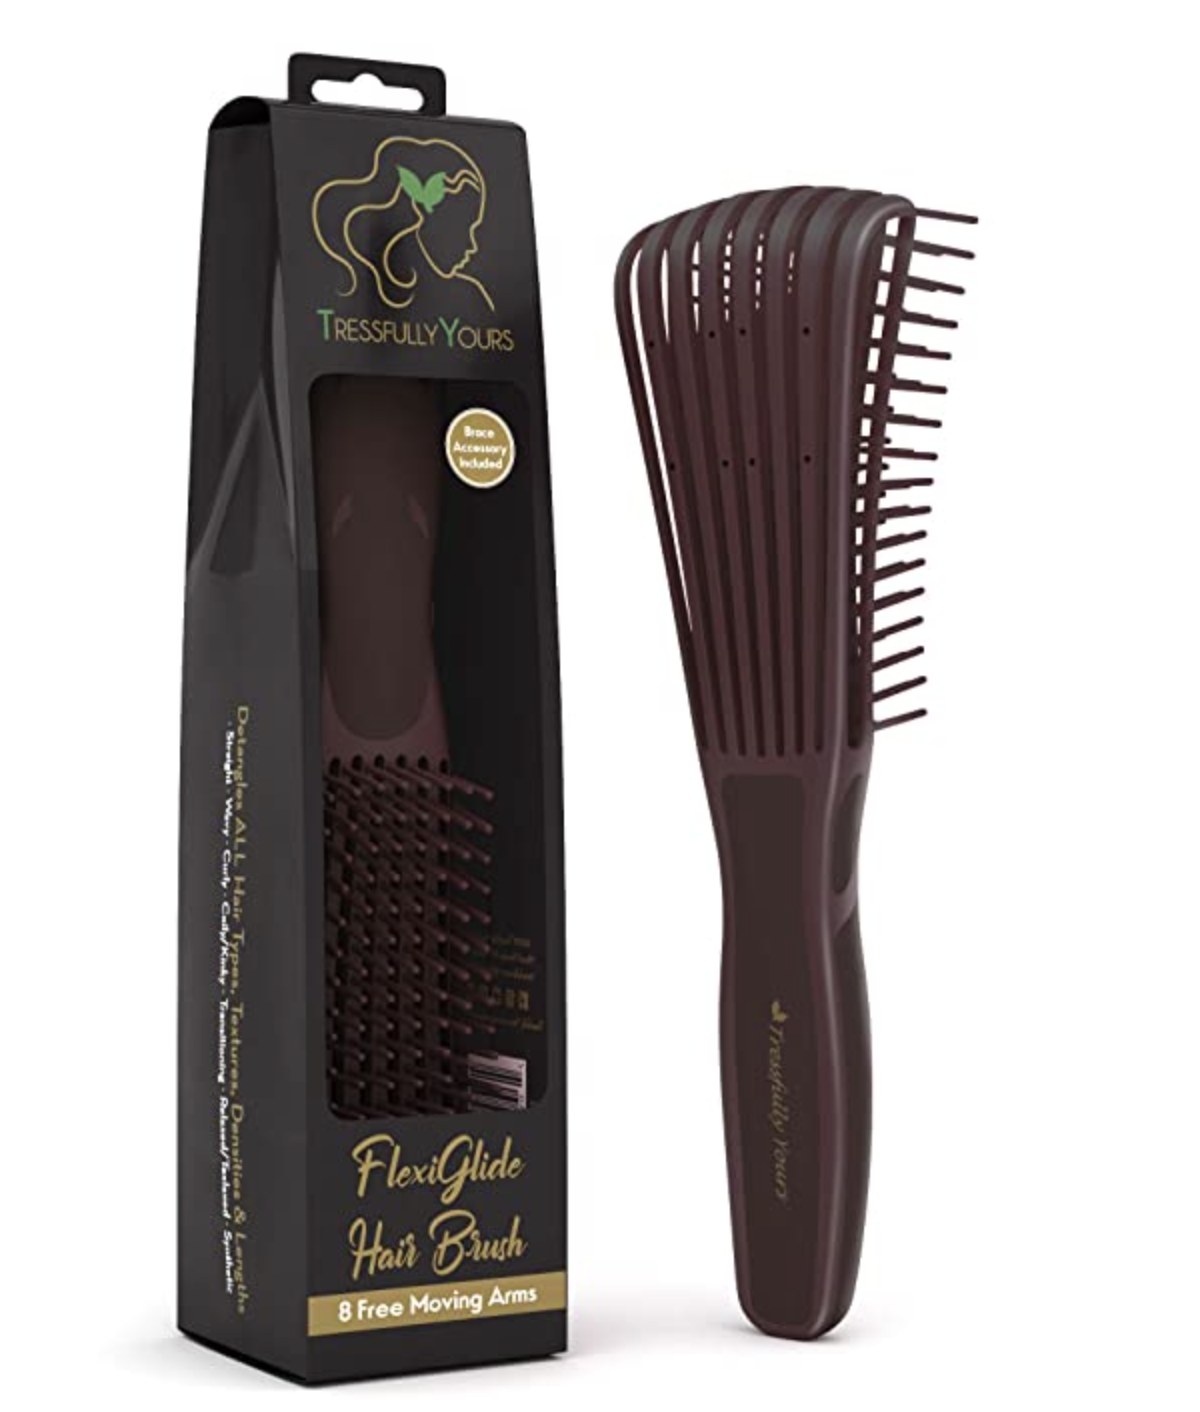 Tressfully Yours FlexiGlide Rubber Brush For Curly Hair